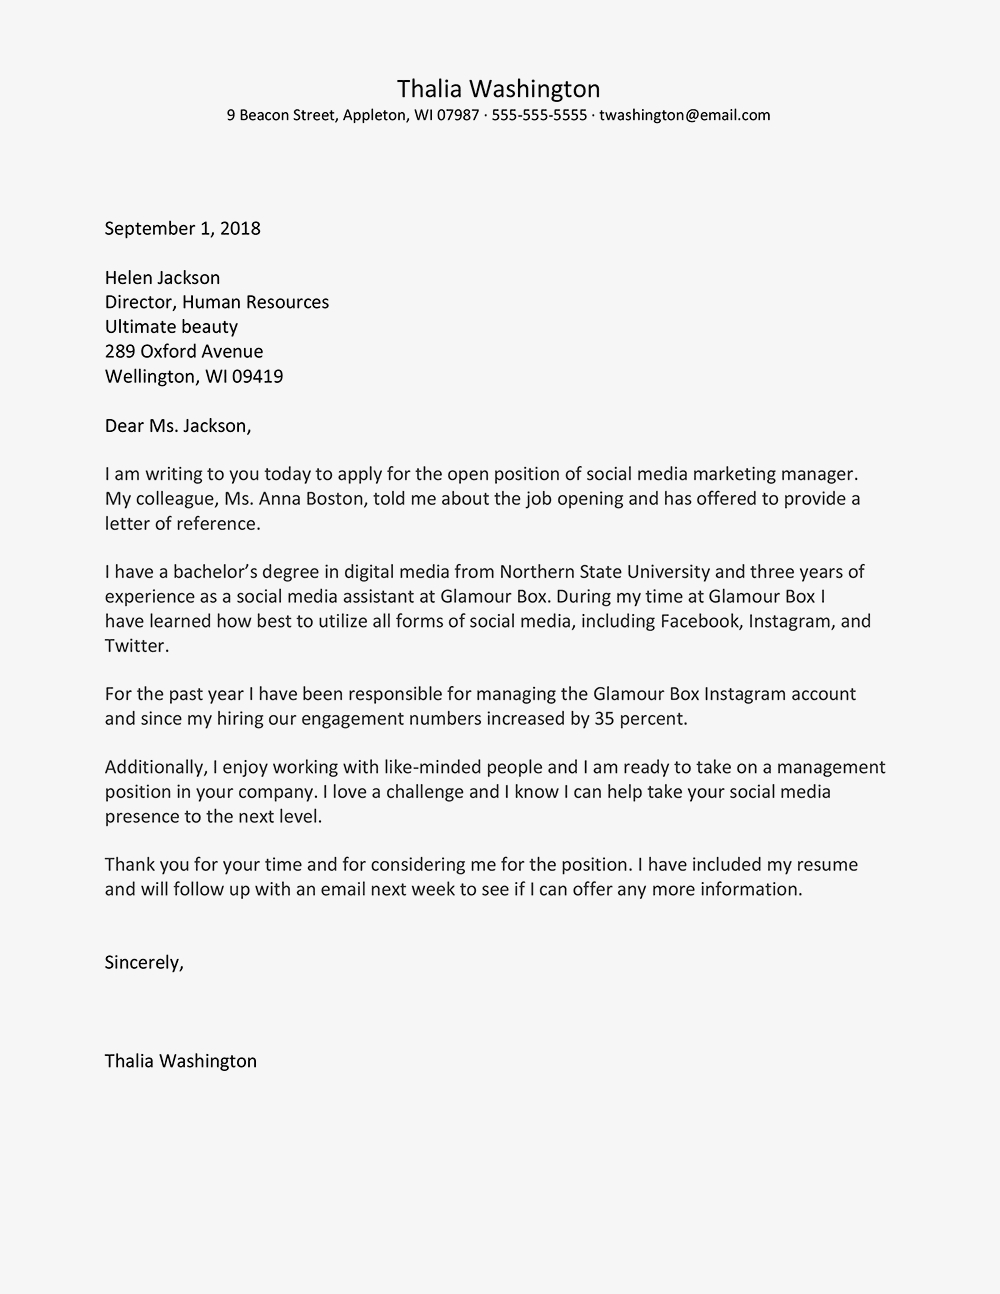 Letter Of Interest Template Microsoft Word Examples With Regard To Letter Of Interest Template Microsoft Word